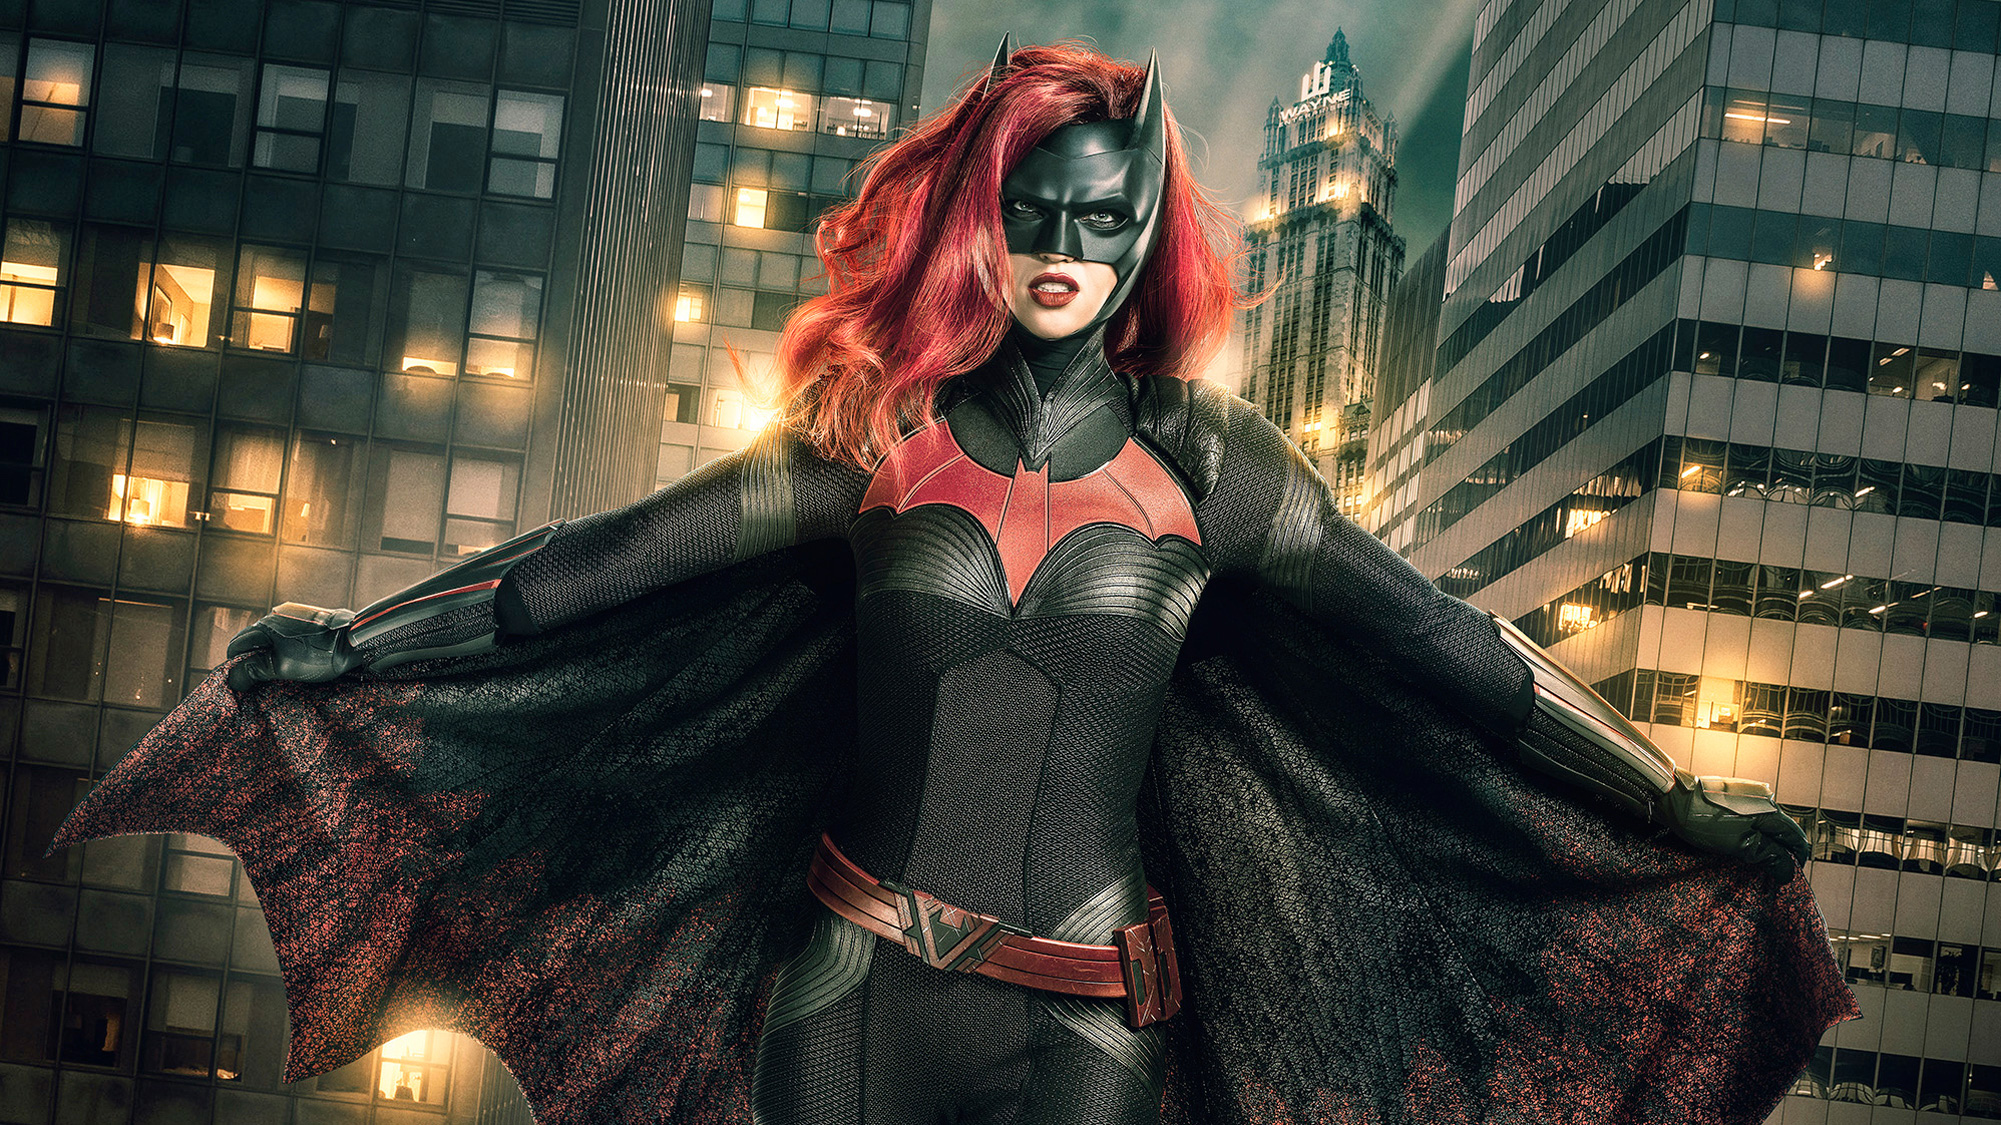 The Cw Ruby Rose As Batwoman Hd Tv Shows 4k Wallpapers Images Backgrounds Photos And Pictures 4944